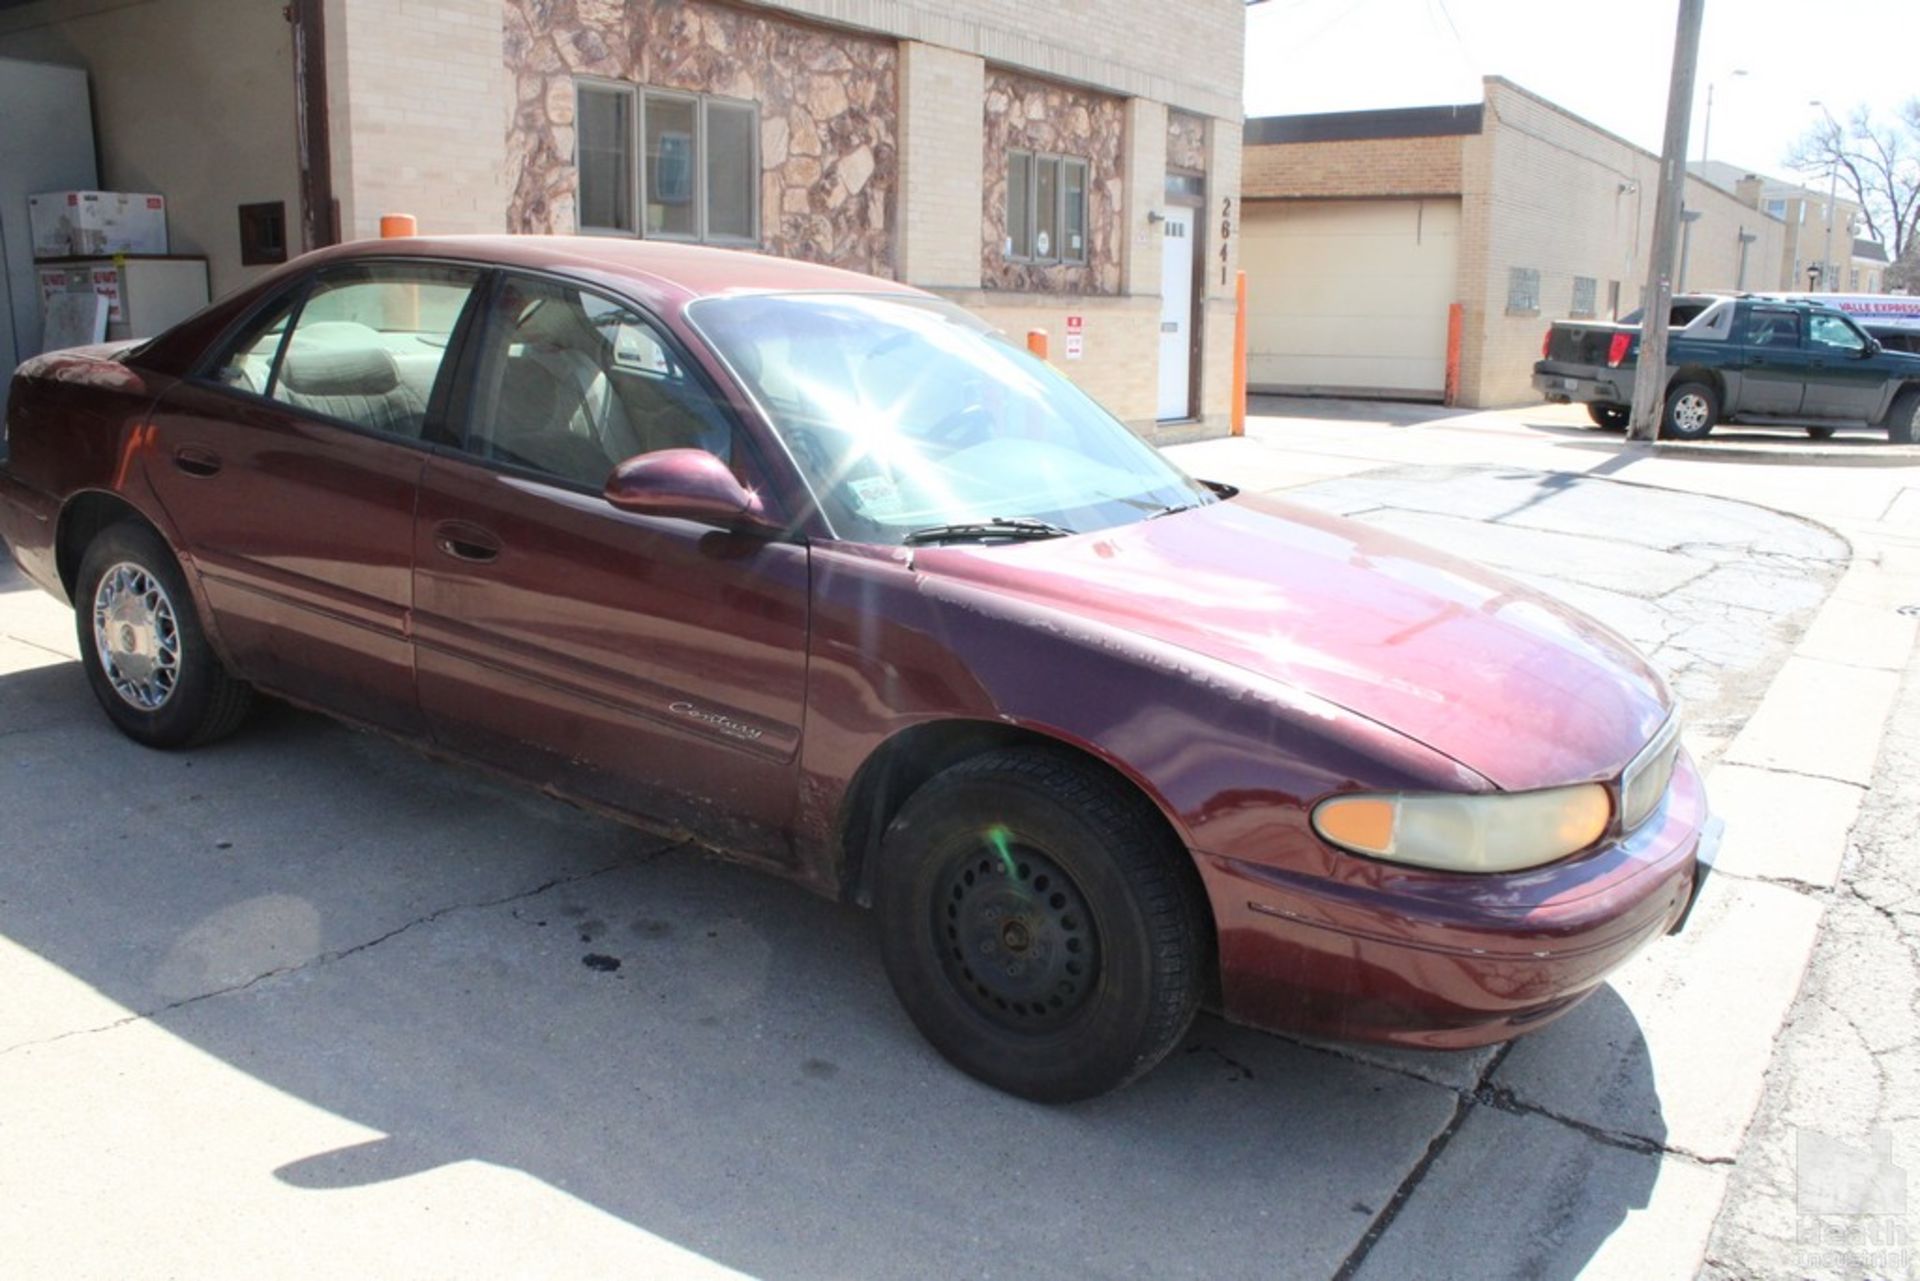 2000 BUICK MODEL CENTURY AUTOMOBILE, VIN: 2G4AS52J511184800, AUTOMATIC TRANSMISSION, CAN'T READ - Image 2 of 7